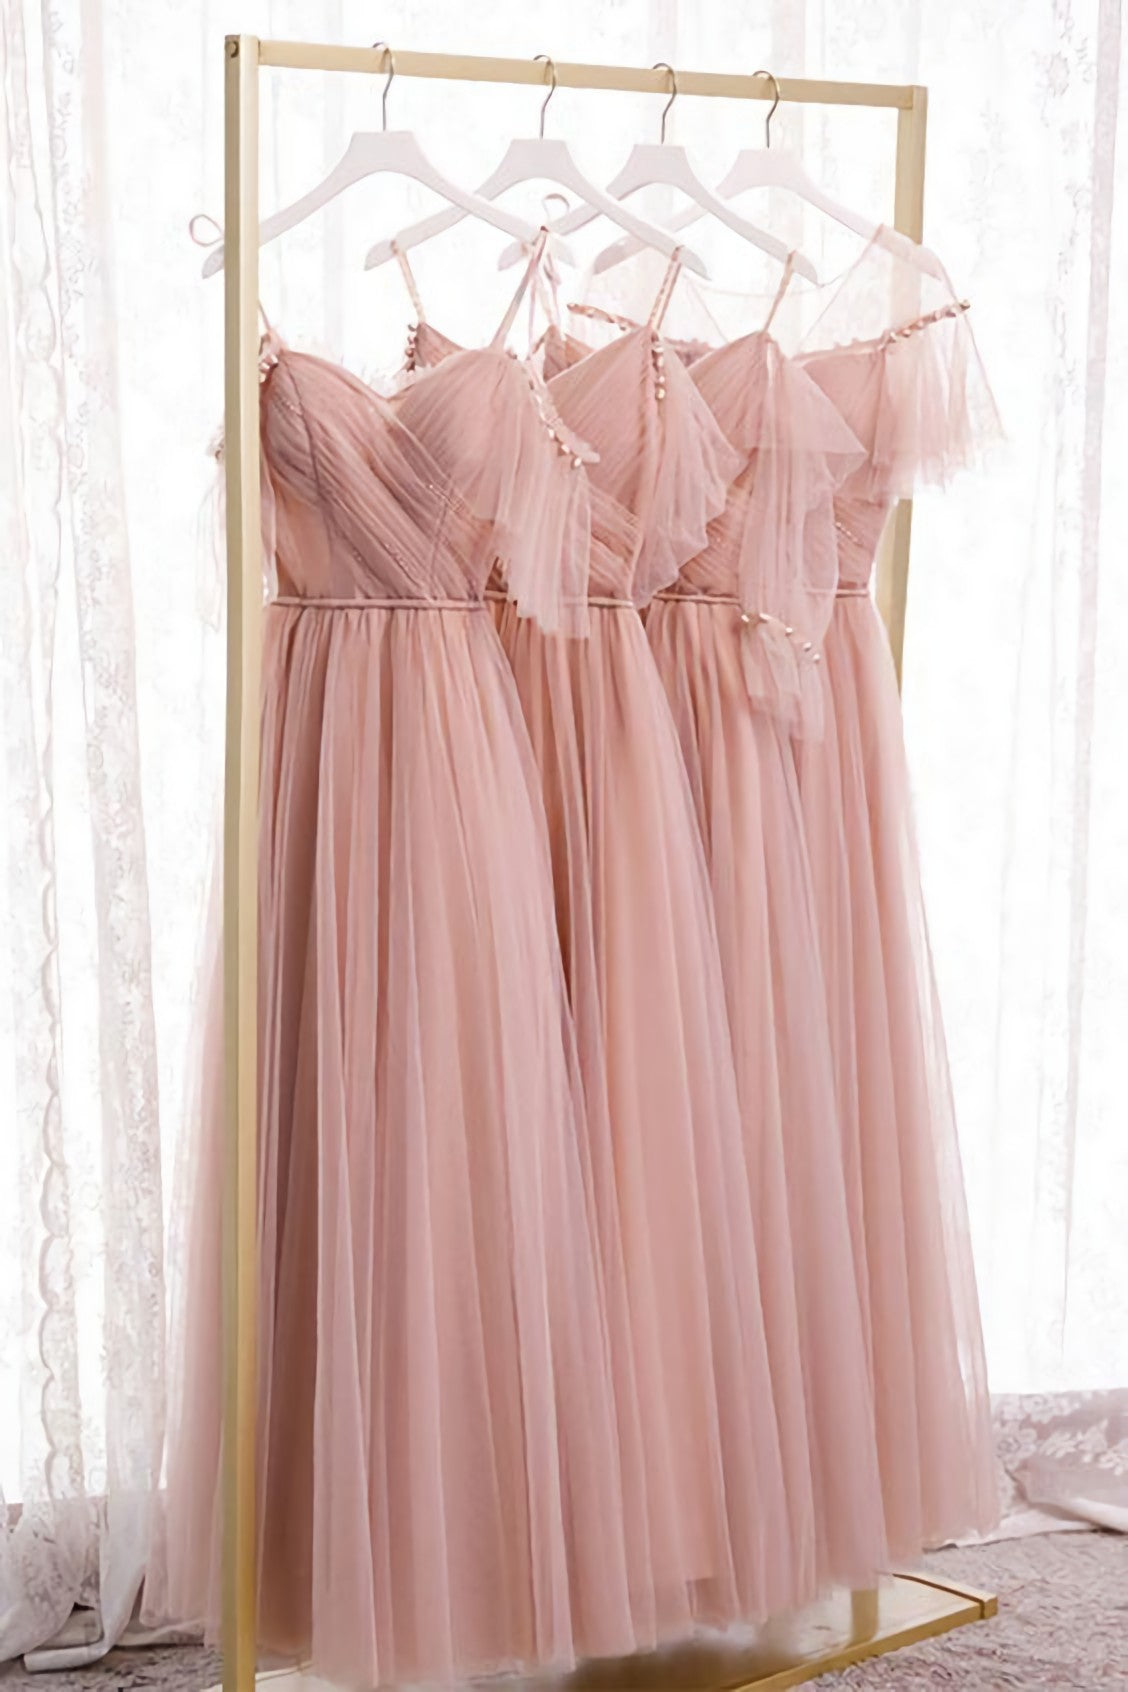 Party Dress For Girls, Blush Pink Tulle Long Bridesmaid Dresses, Prom Dress, Evening Dresses